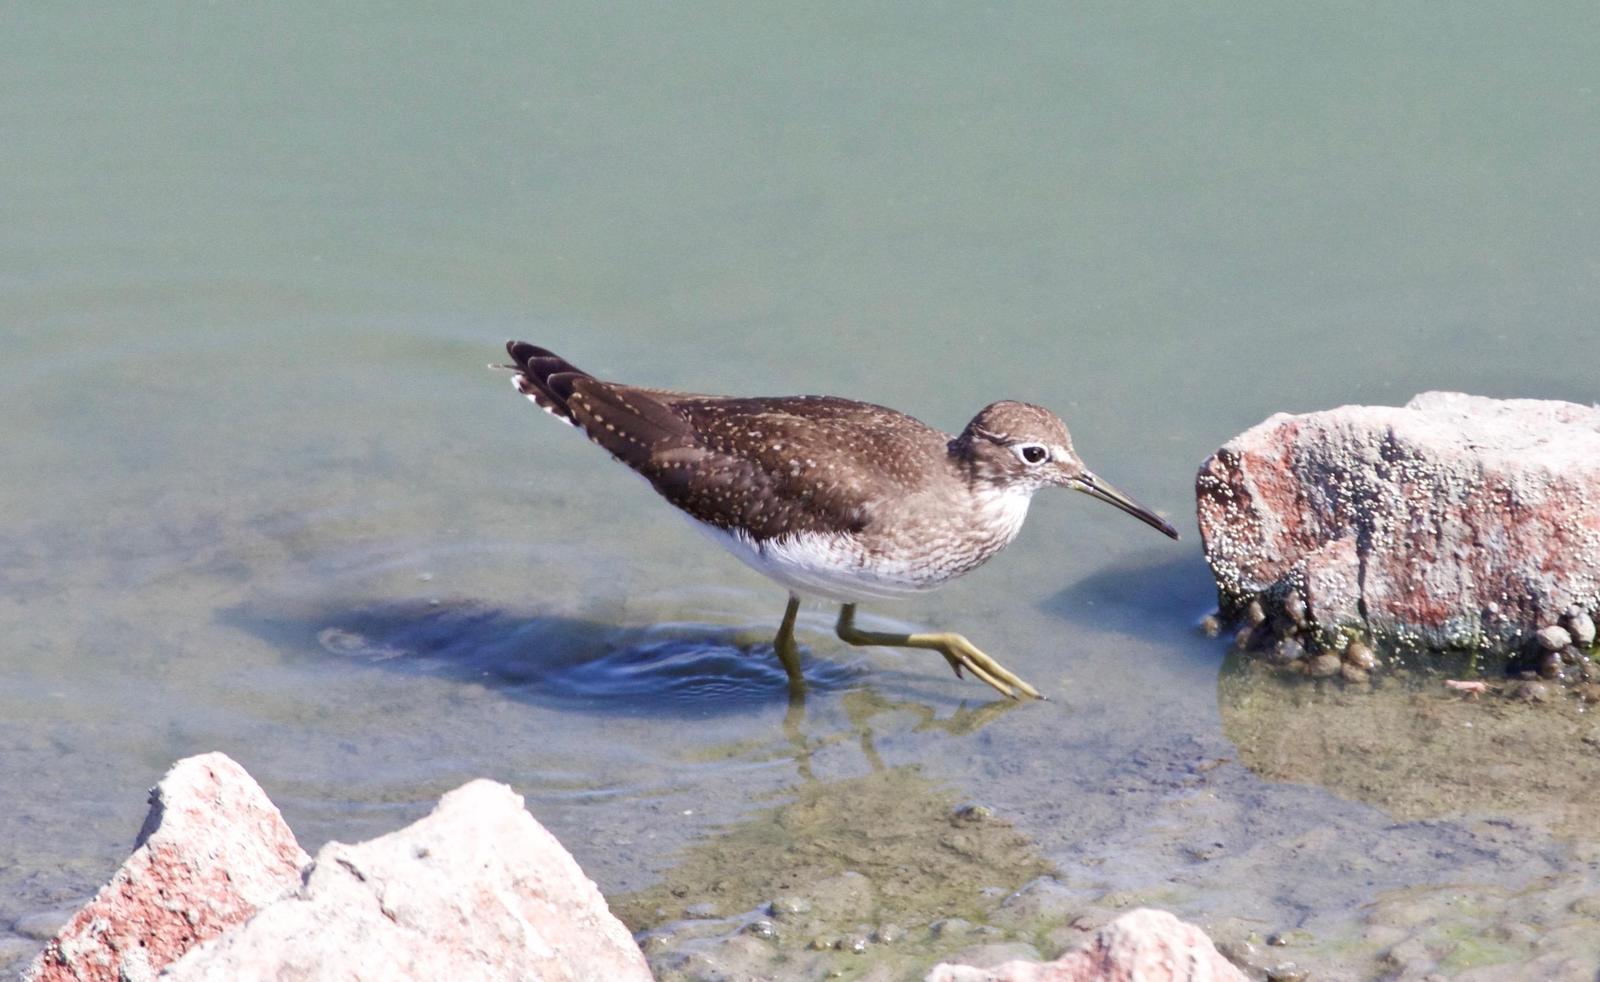 Solitary Sandpiper Photo by Rob O'Donnell